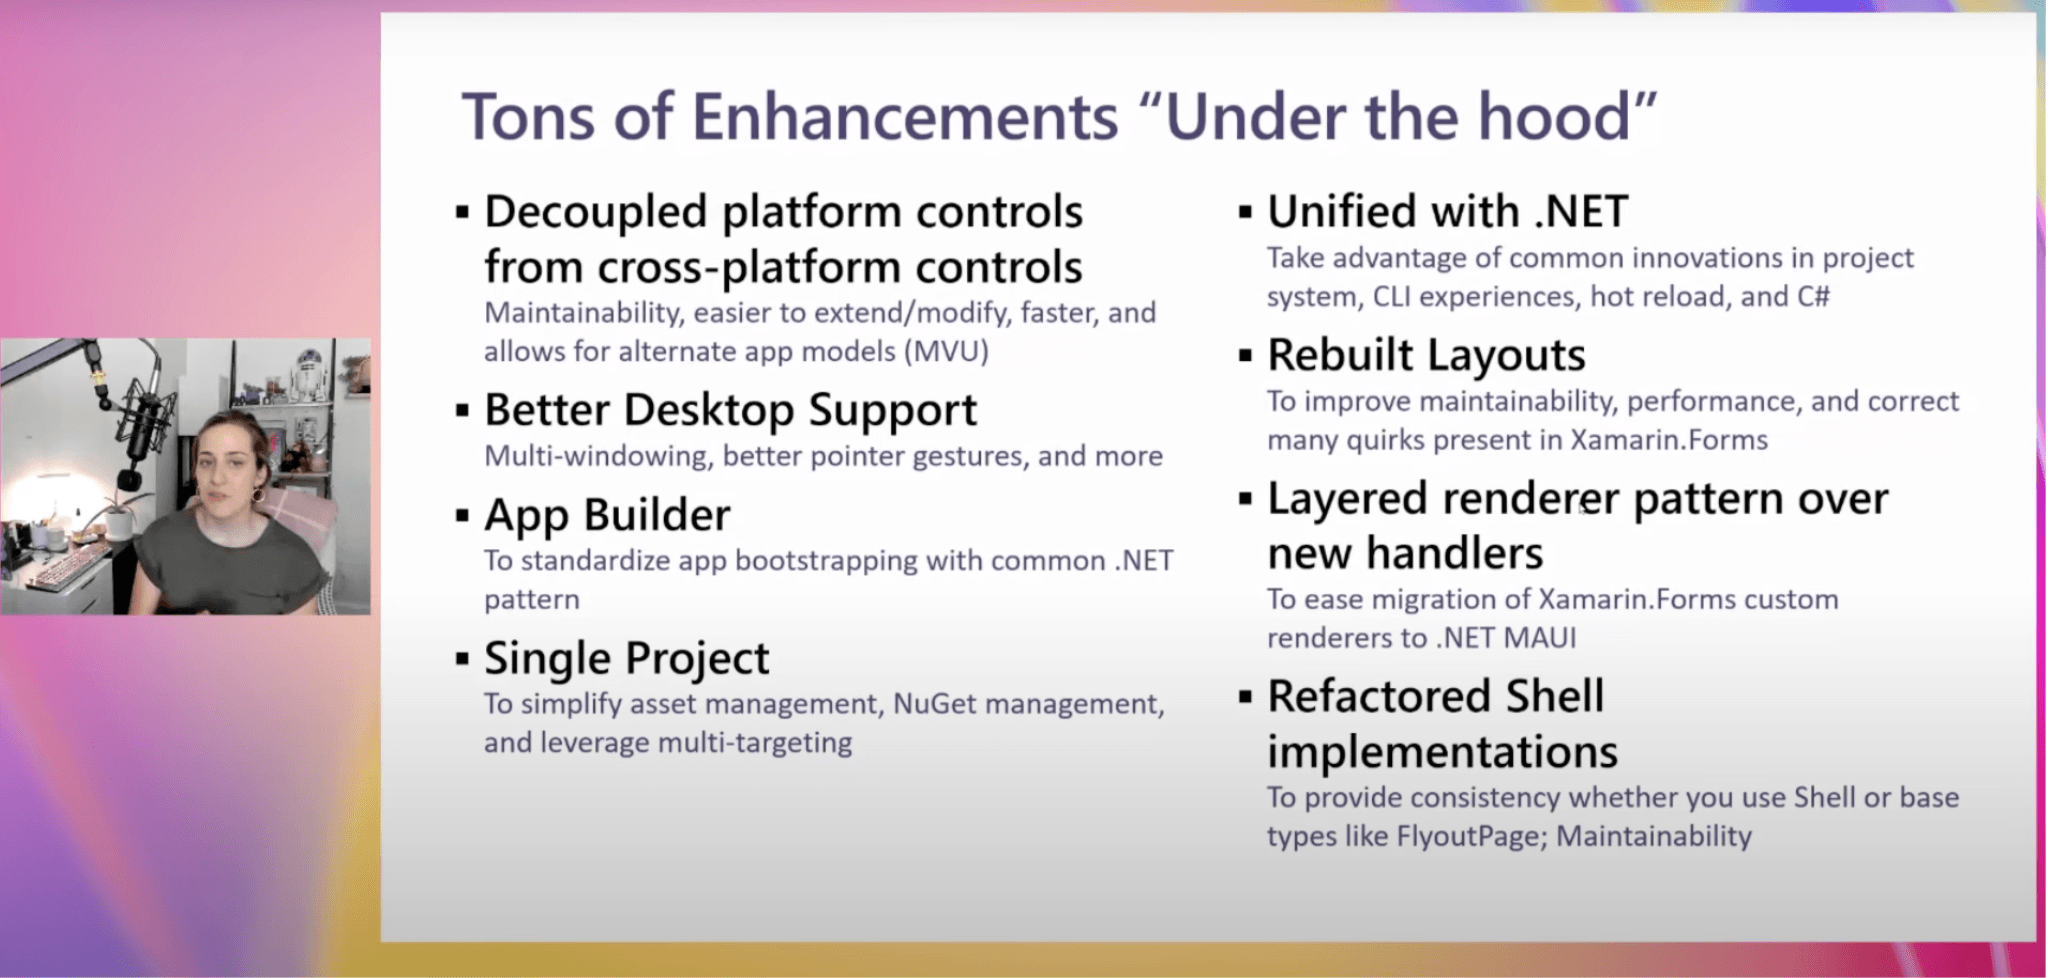 Tons of enhancements: Decoupled platform controls from cross platform controls; better desktop support; app builder; single project; unified with .net; rebuilt layouts; layered renderer pattern over new handlers; refactored shell implementations.